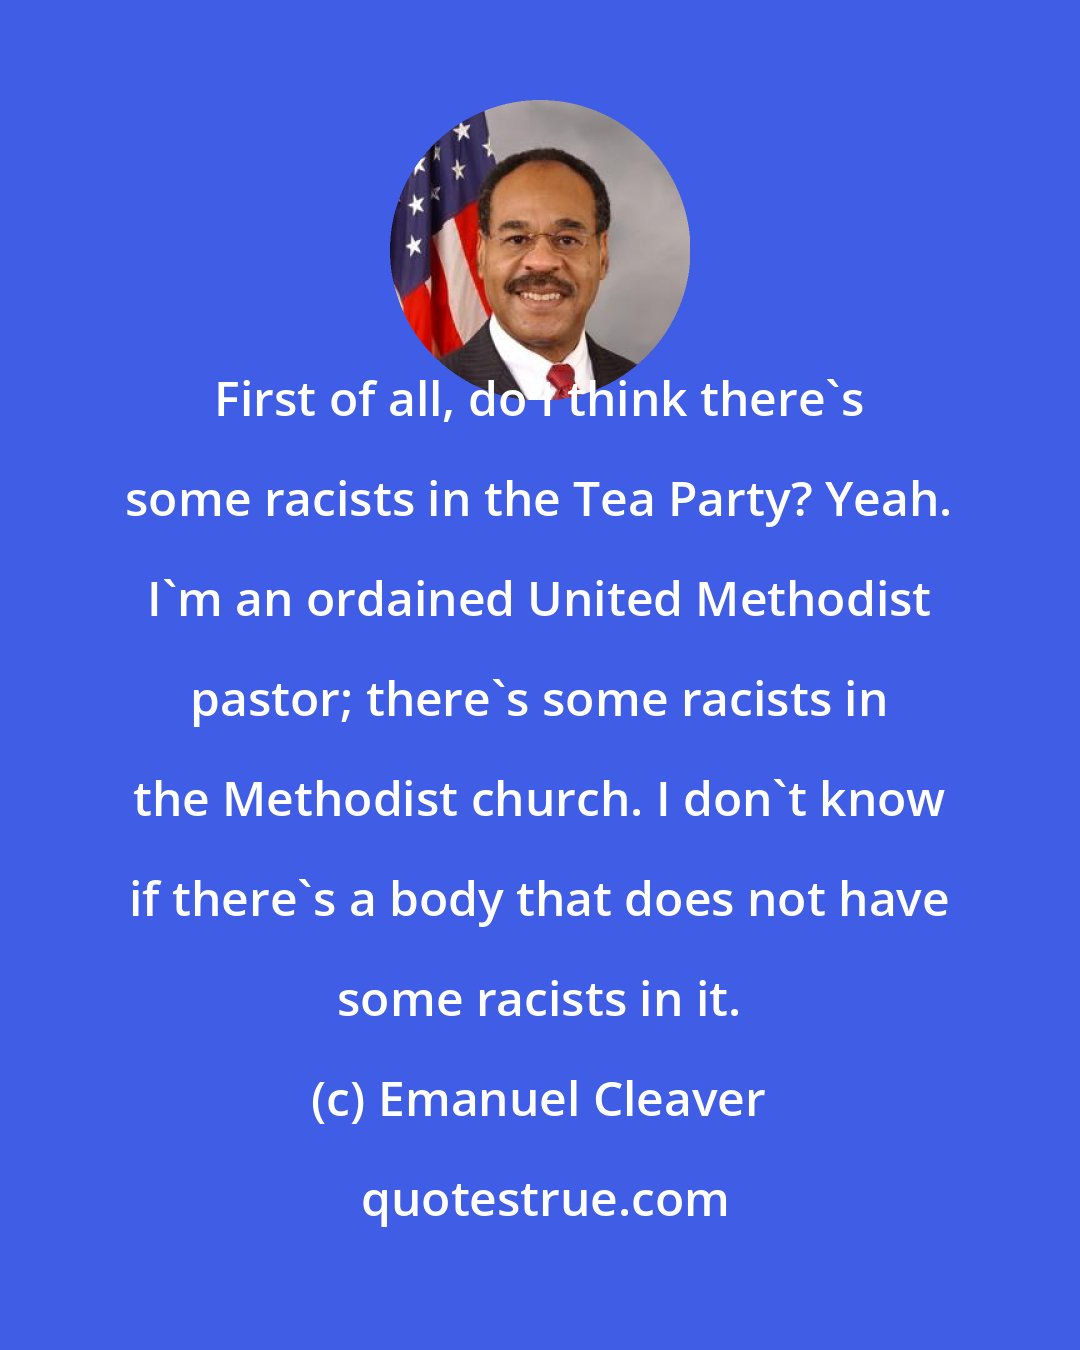 Emanuel Cleaver: First of all, do I think there's some racists in the Tea Party? Yeah. I'm an ordained United Methodist pastor; there's some racists in the Methodist church. I don't know if there's a body that does not have some racists in it.